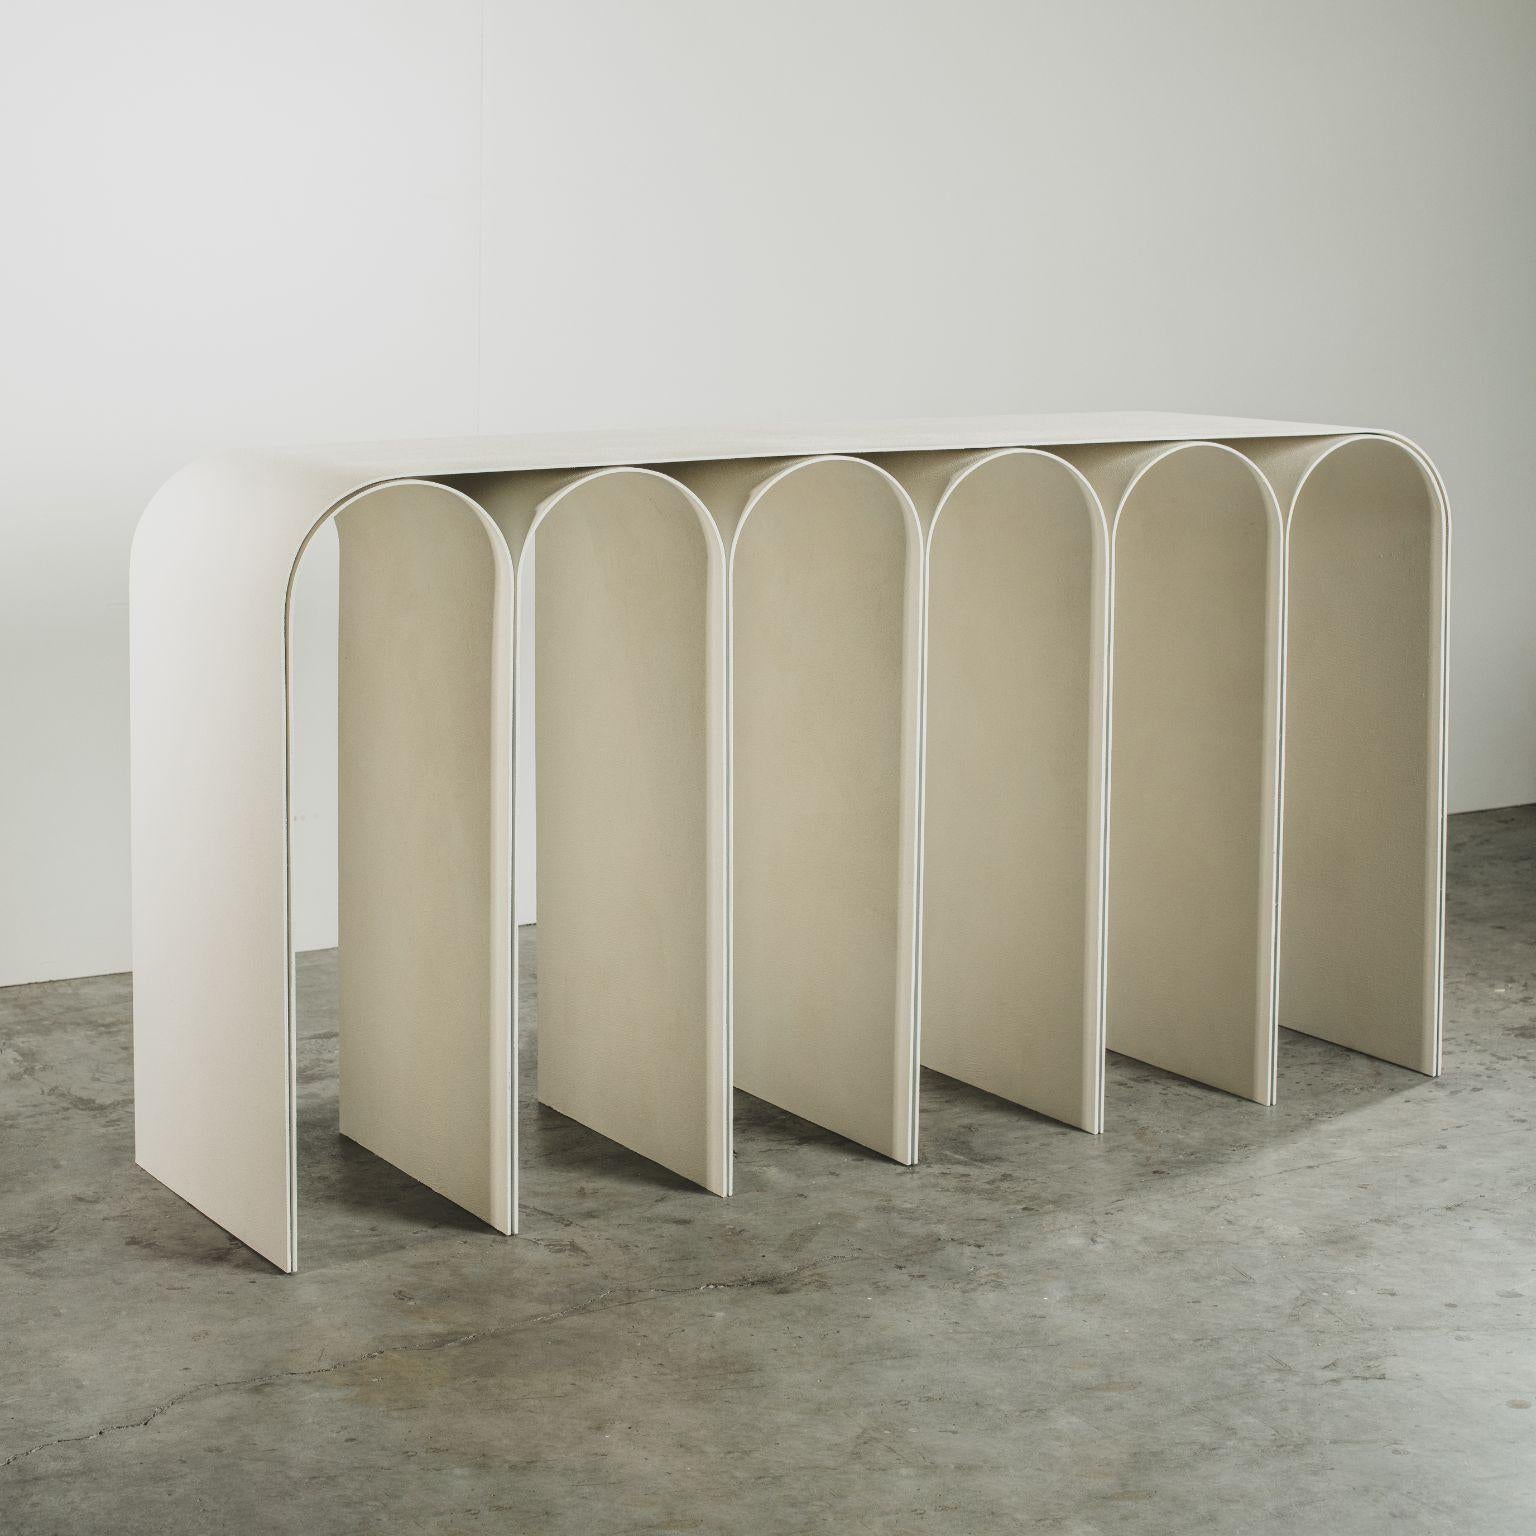 White Arch Console by Pietro Franceschini
--Sold exclusively by Galerie Philia--
Dimensions: W 103 x L 32 x H 86 cm.
Materials: white plaster.
**Made-to-order dimensions can be possible.

>>Available finishes:
Steel (black, white, brass